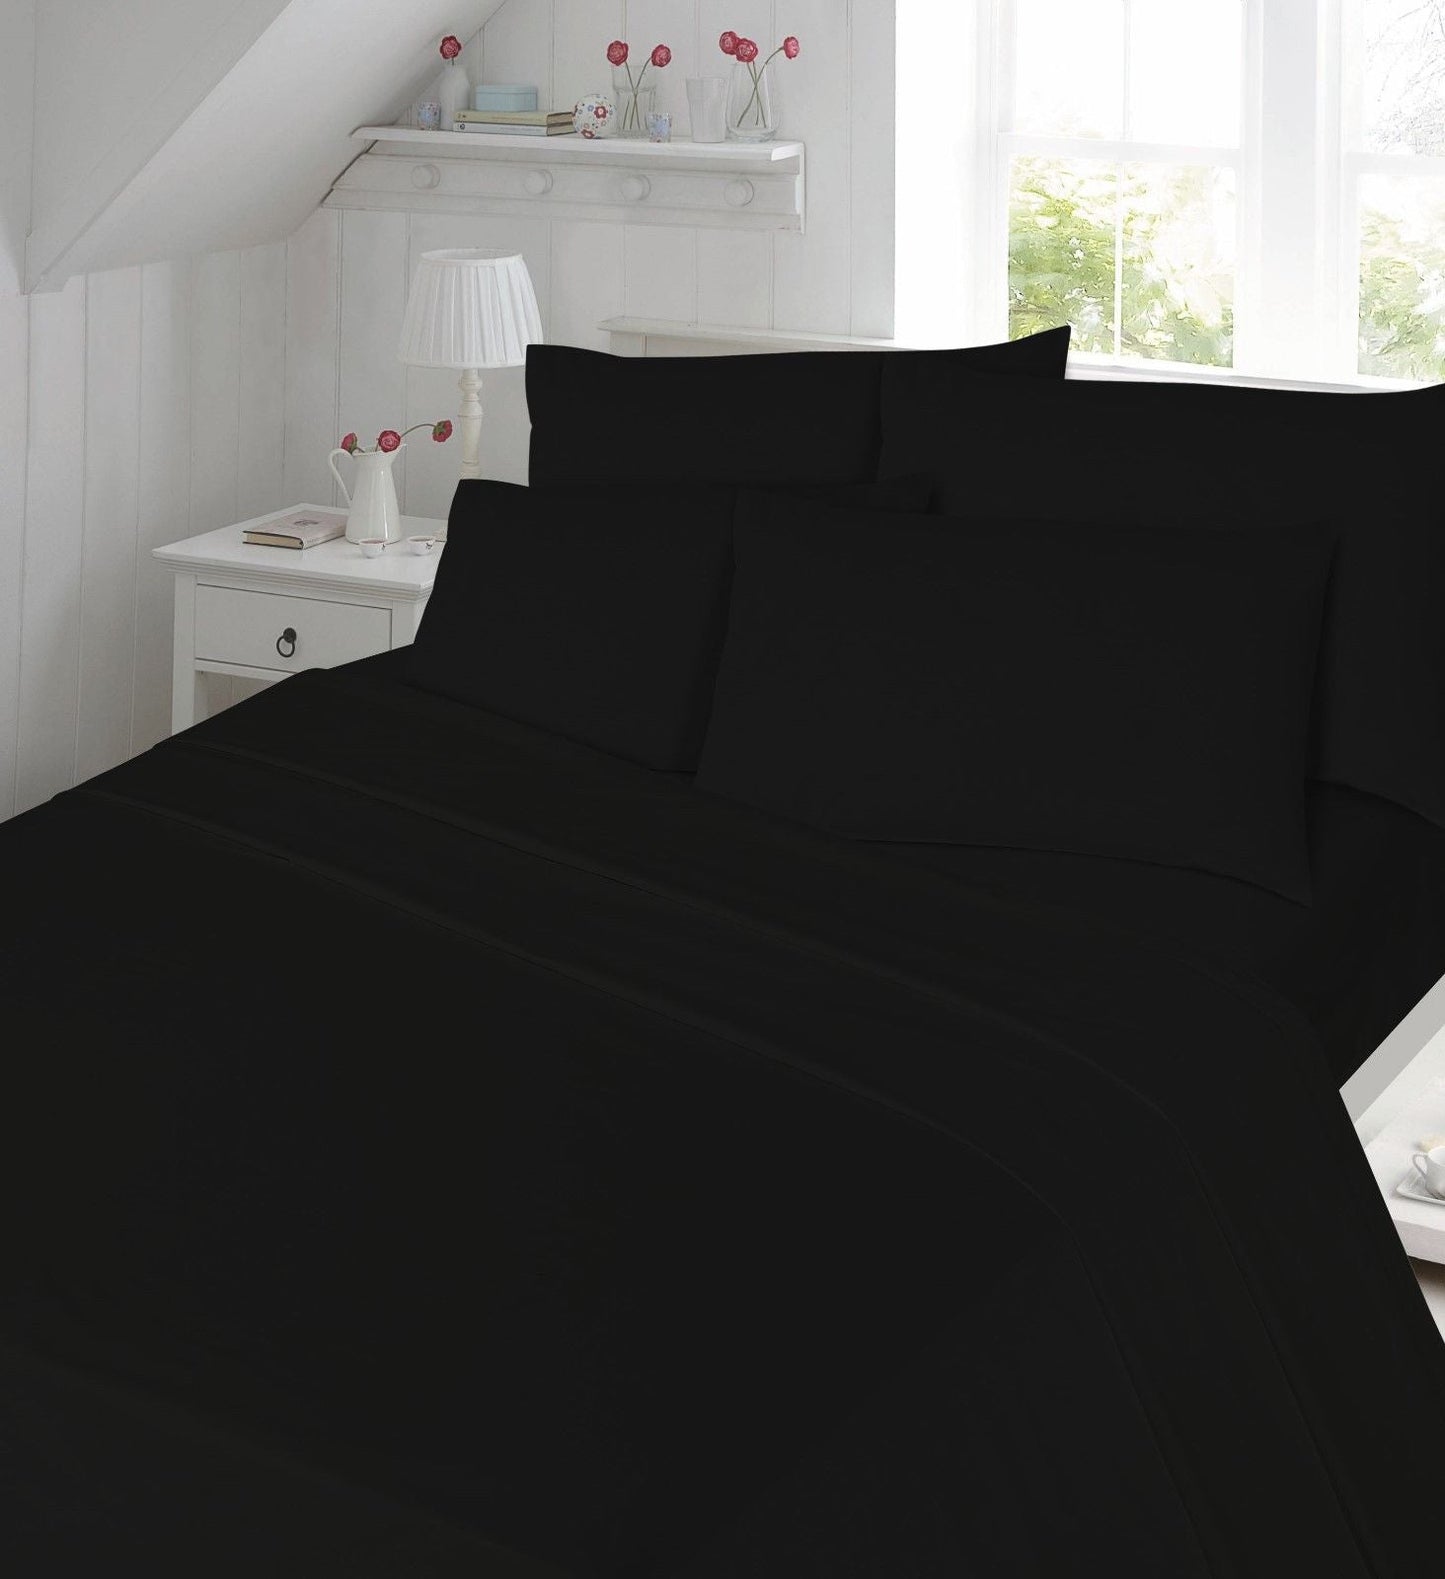 Flannelette Fitted Sheet Cotton Thermal With FREE MATCHING PILLOWCASE - TheComfortshop.co.ukBed Sheets0721718966562thecomfortshopTheComfortshop.co.ukFLNT FIT FREE PP Black SingleBlackFitted Sheet Single OnlyFlannelette Fitted Sheet Cotton Thermal With FREE MATCHING PILLOWCASE - TheComfortshop.co.uk